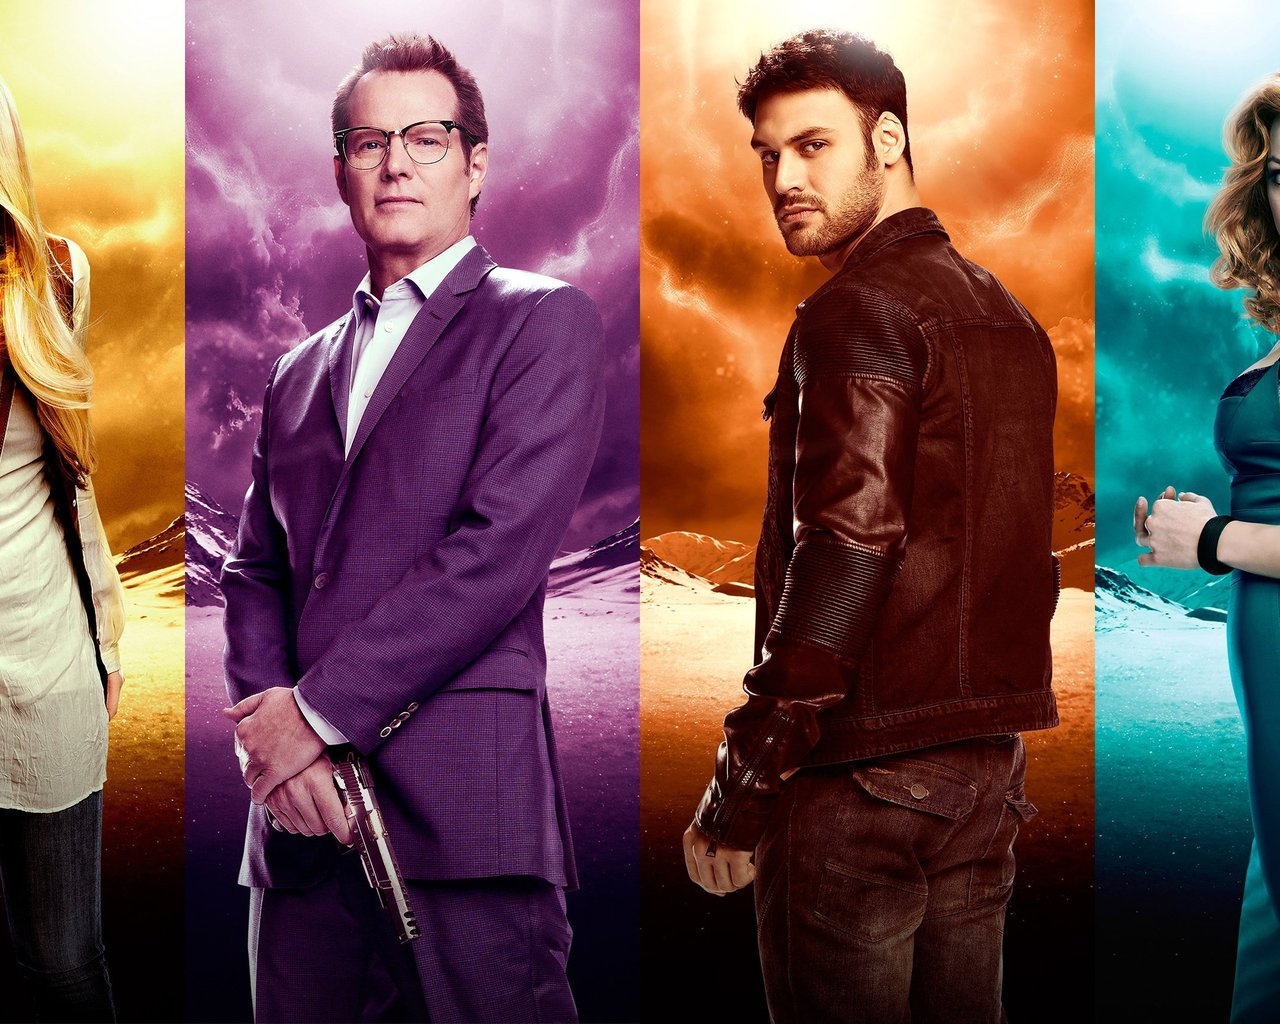 Heroes Reborn Cast for 1280 x 1024 resolution